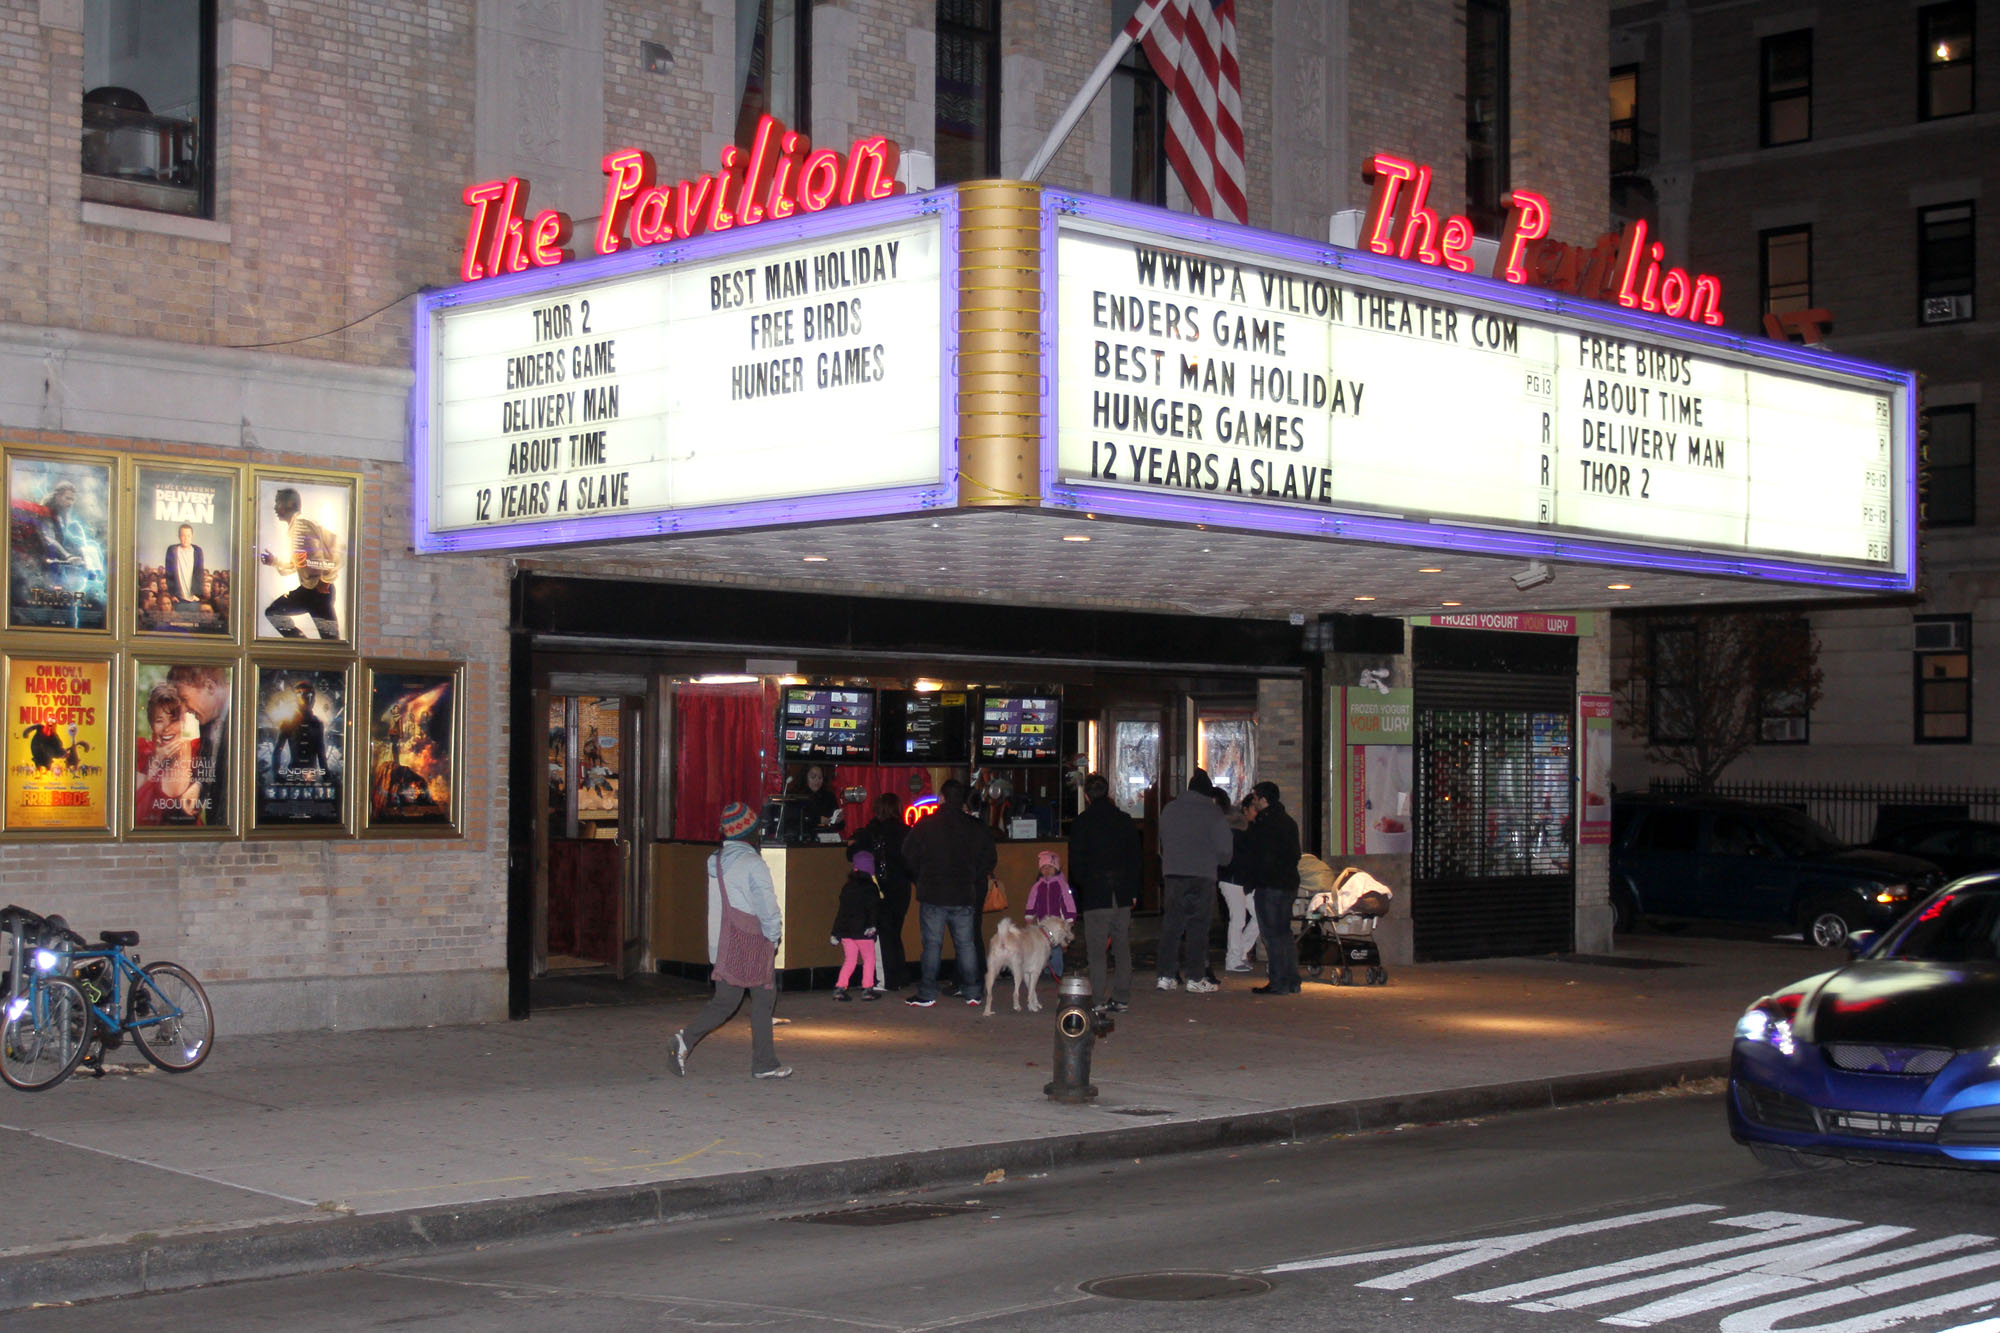 The Pavilion Theater In Park Slope To Be Replaced! – Brooklyn Buzz